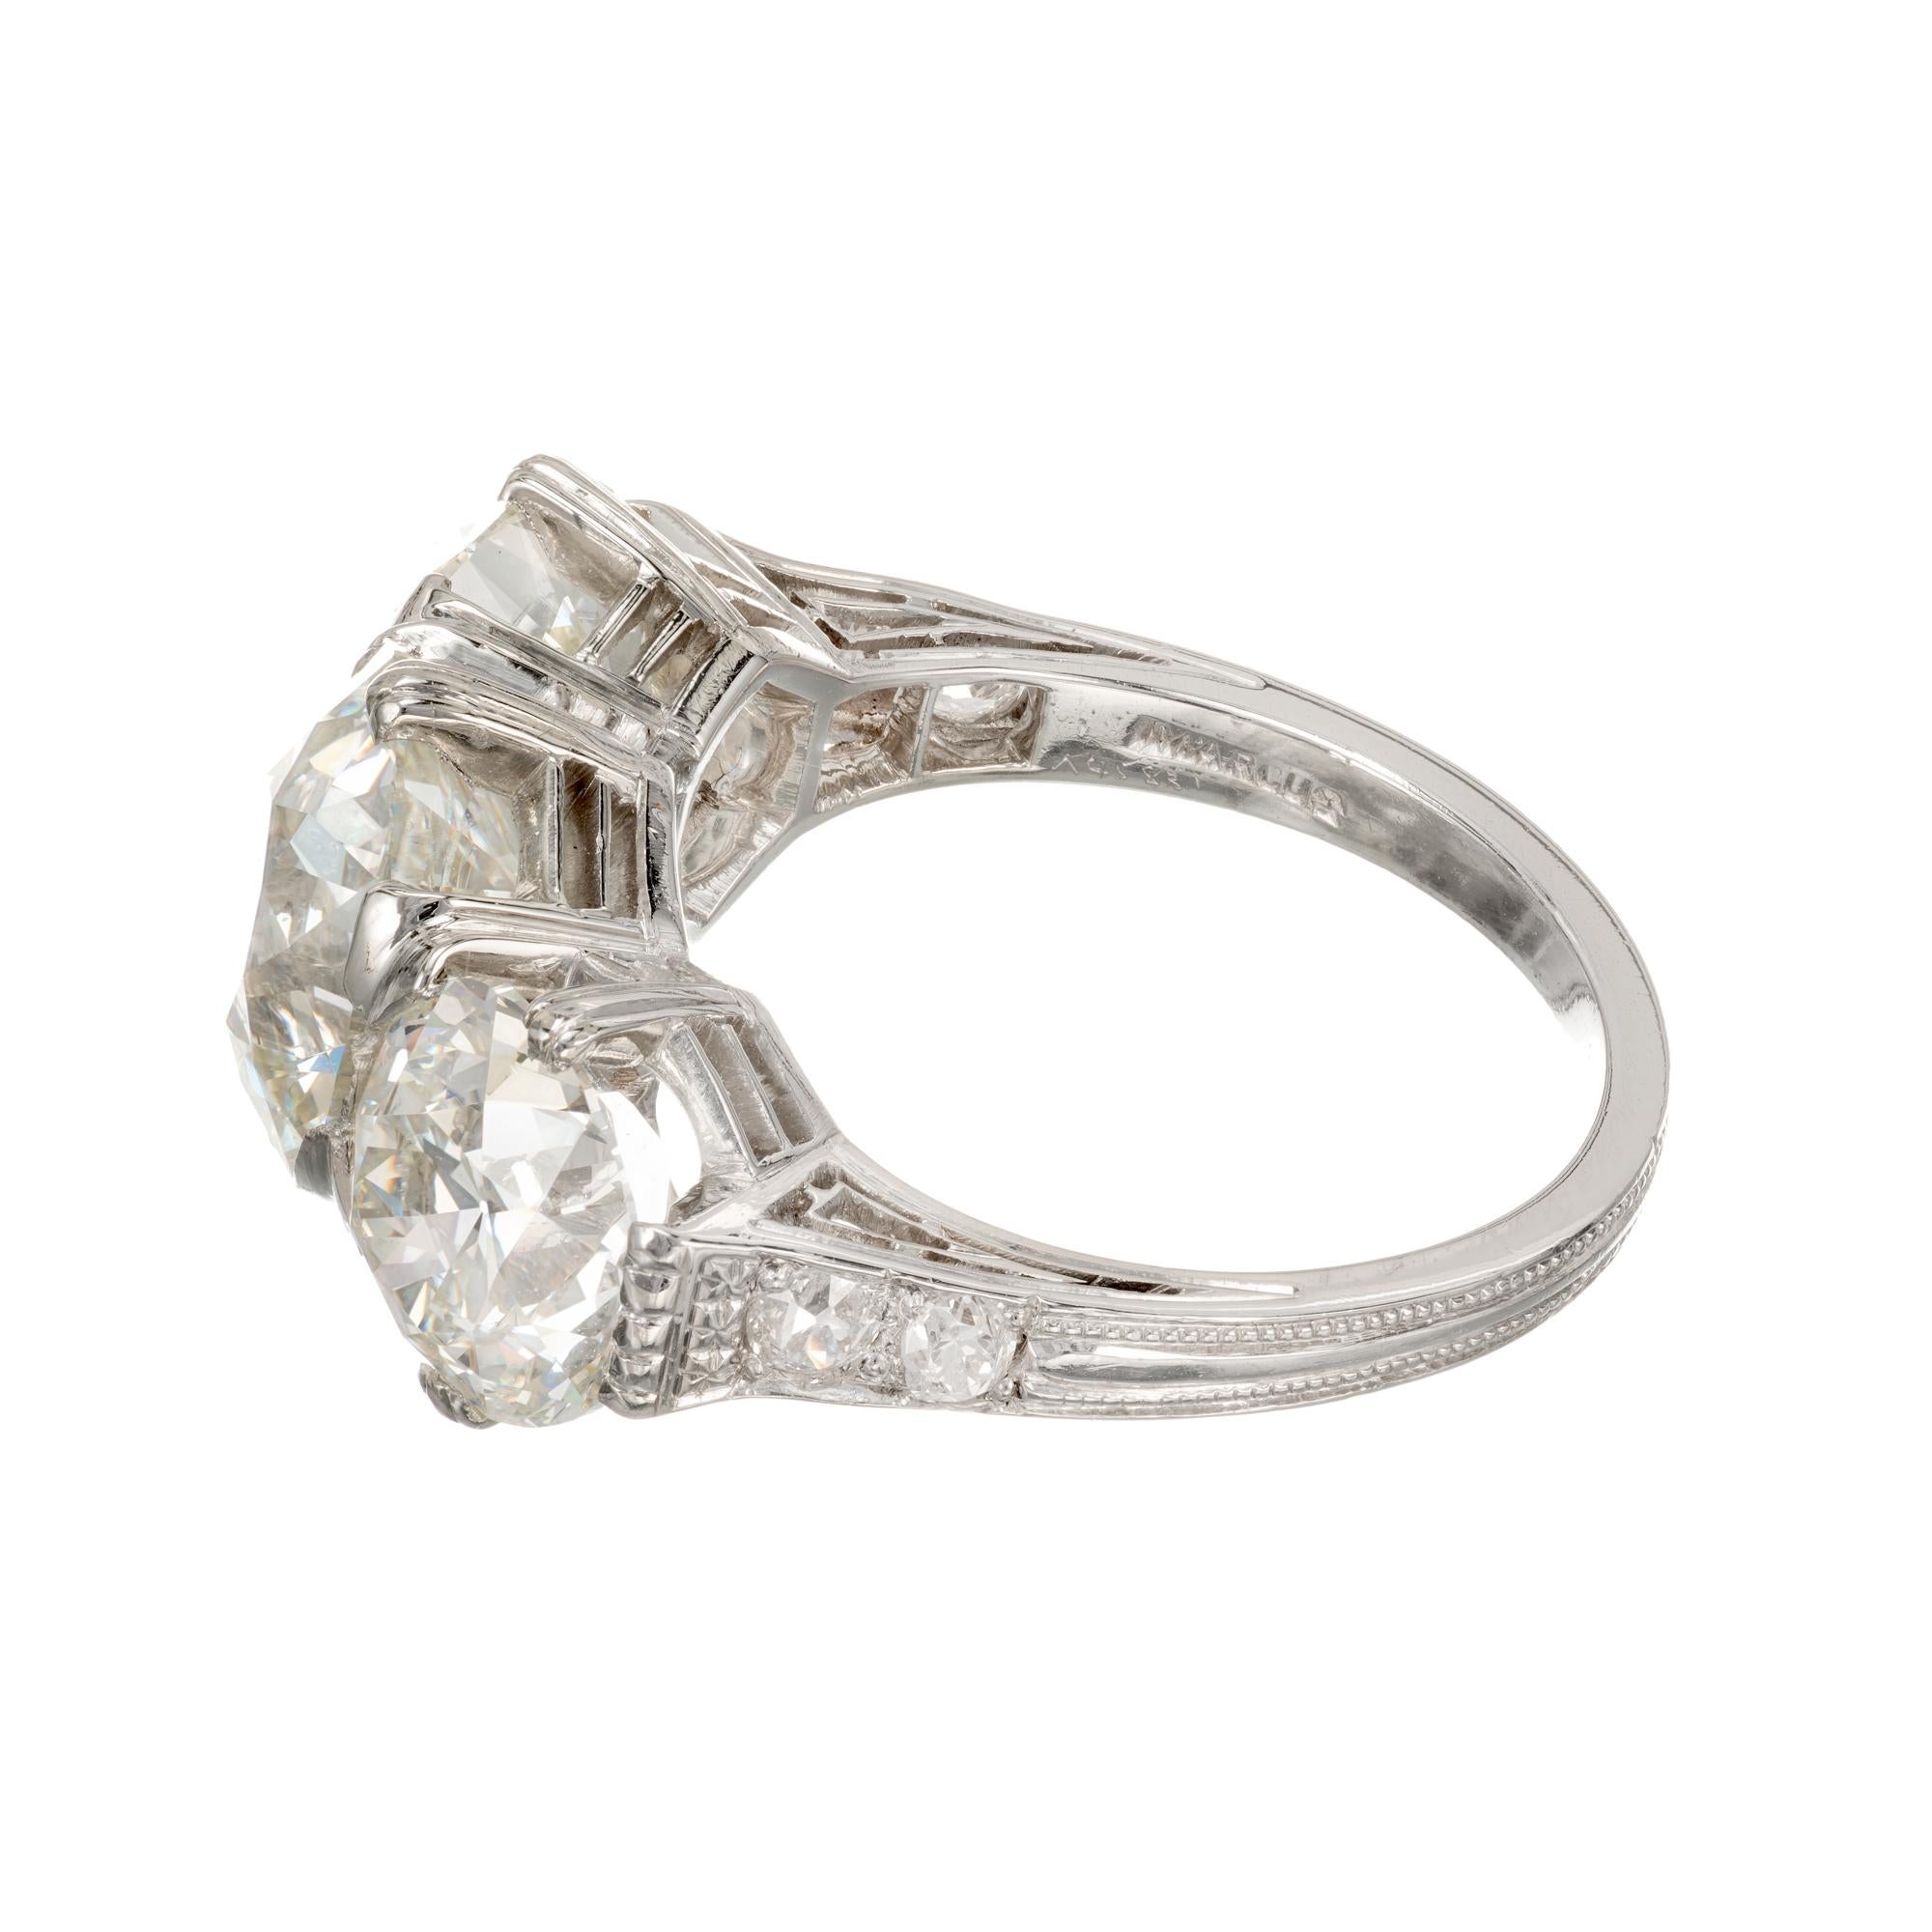 Marcus & Co. GIA 6.35 Carat Diamond Platinum Three-Stone Engagement Ring In Excellent Condition For Sale In Stamford, CT